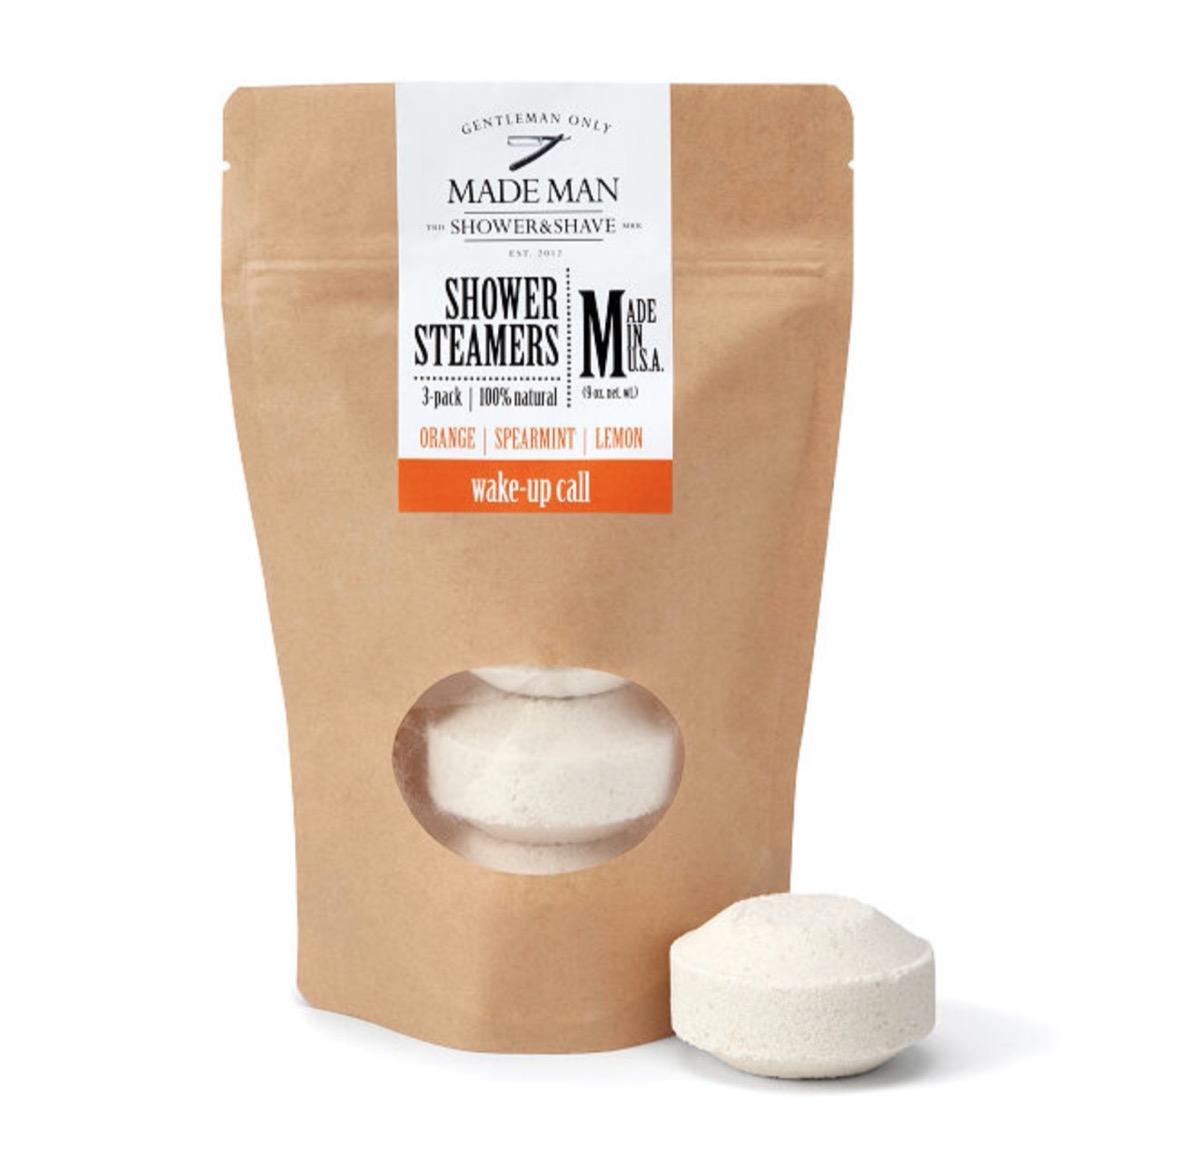 brown paper bag reading "shower steamers" with a small puck-like white object next to it